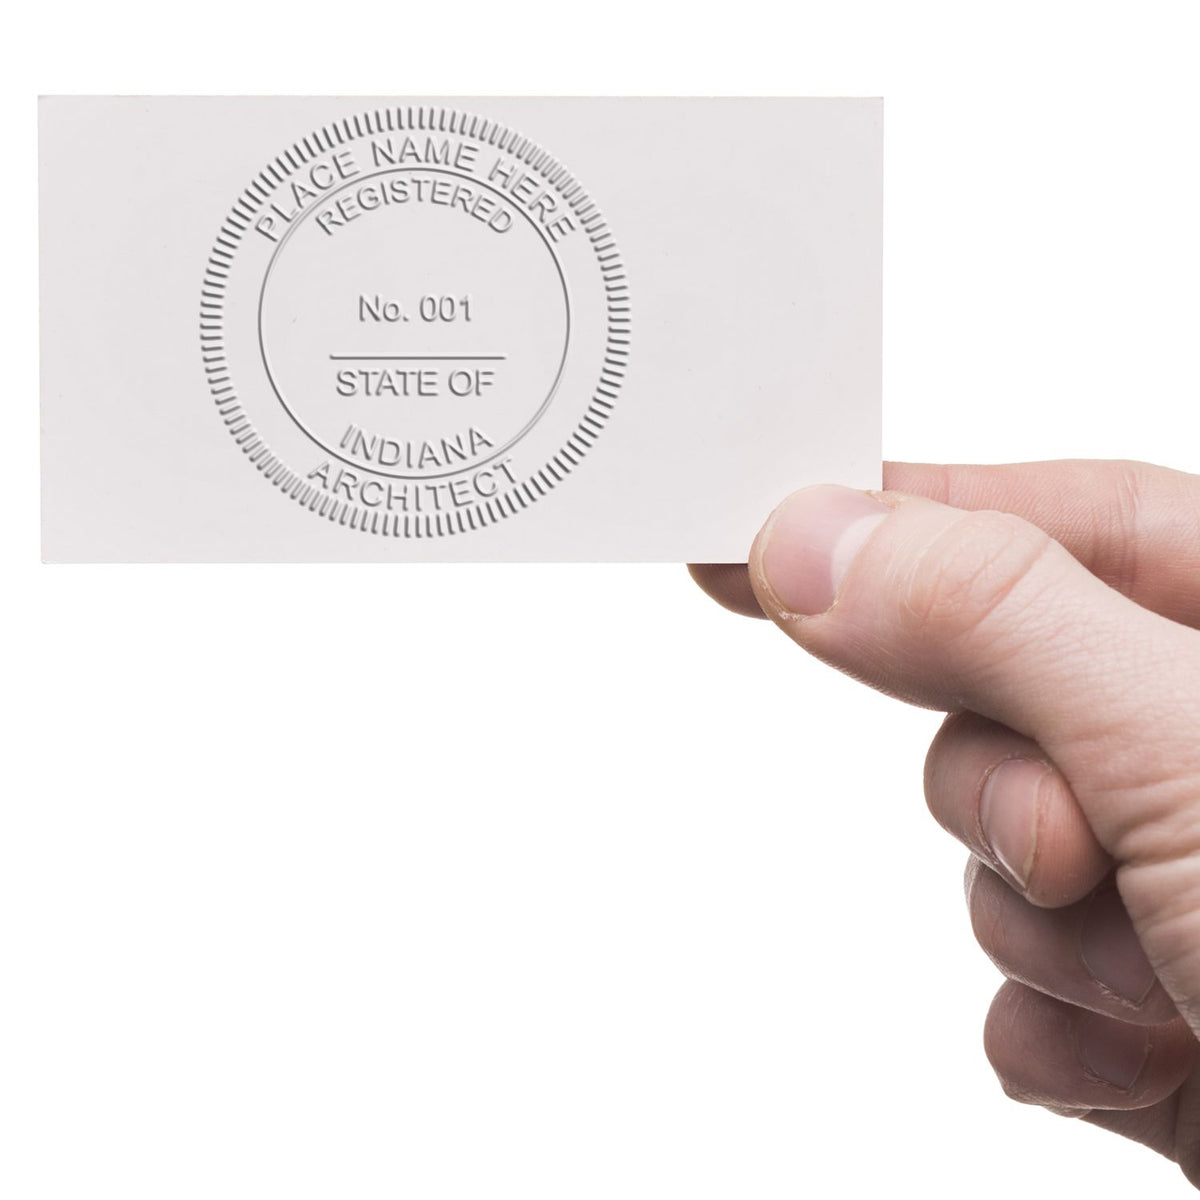 The Indiana Desk Architect Embossing Seal stamp impression comes to life with a crisp, detailed photo on paper - showcasing true professional quality.